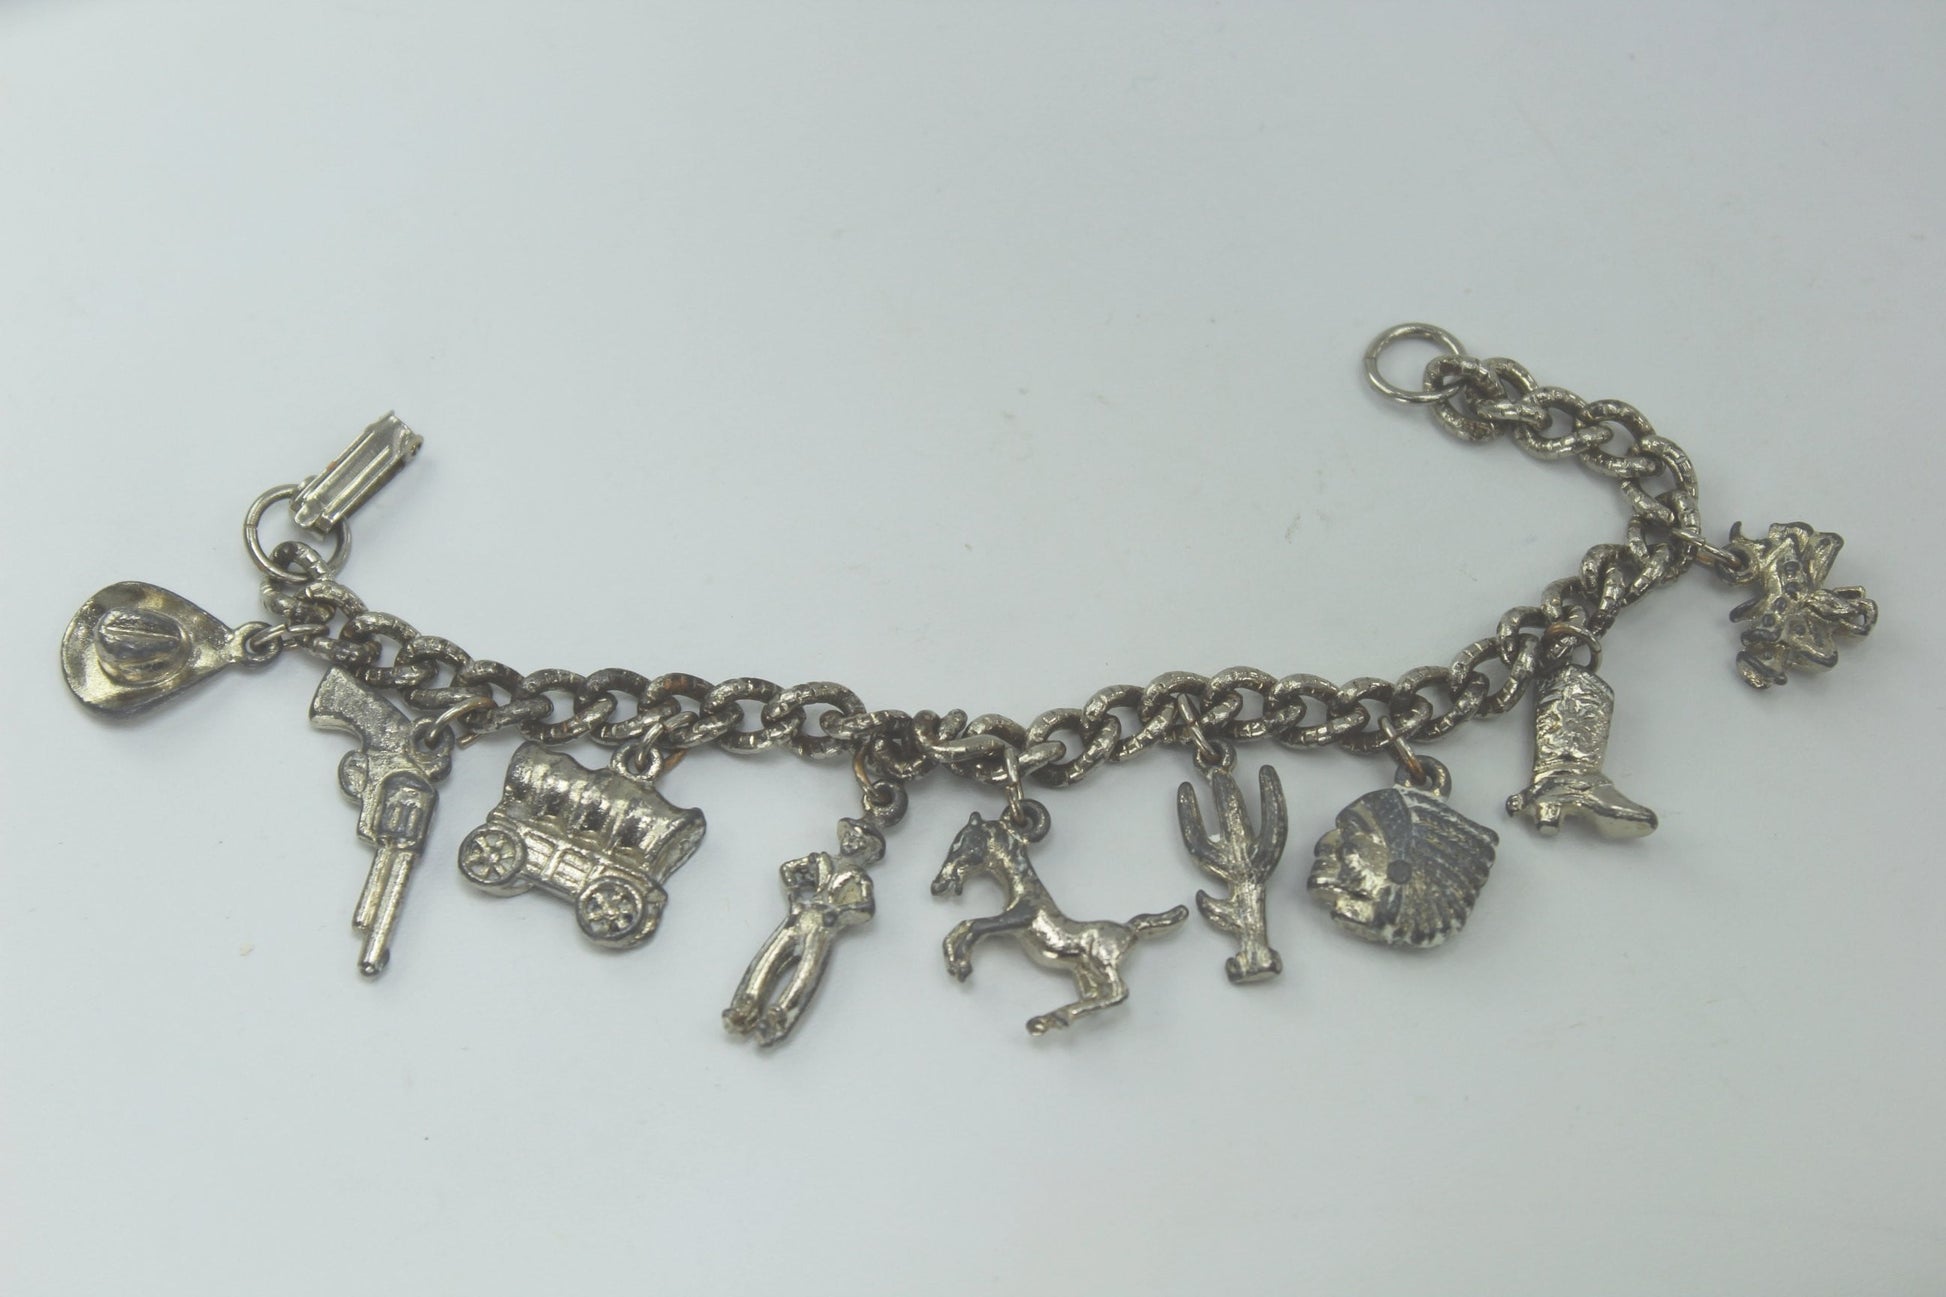 Charm Bracelet 1940s Southwest Cowboy White Metal Collectible Boot Horse Cactus Chief collectible